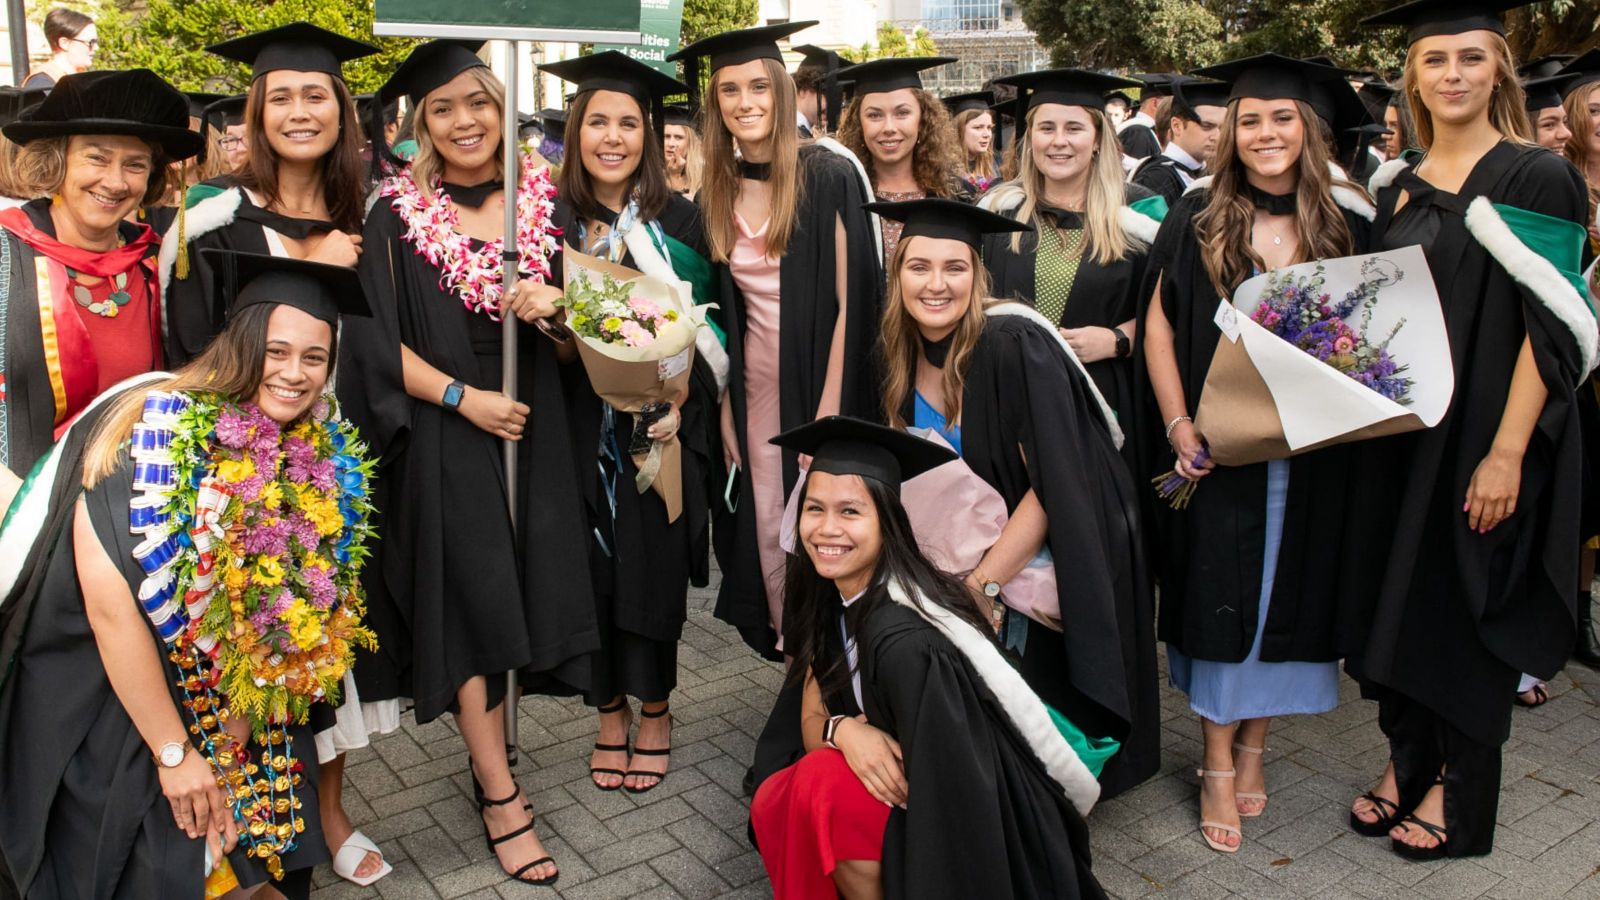 group of girls wearing bachelor of nursing hoods and gowns gathered for graduation